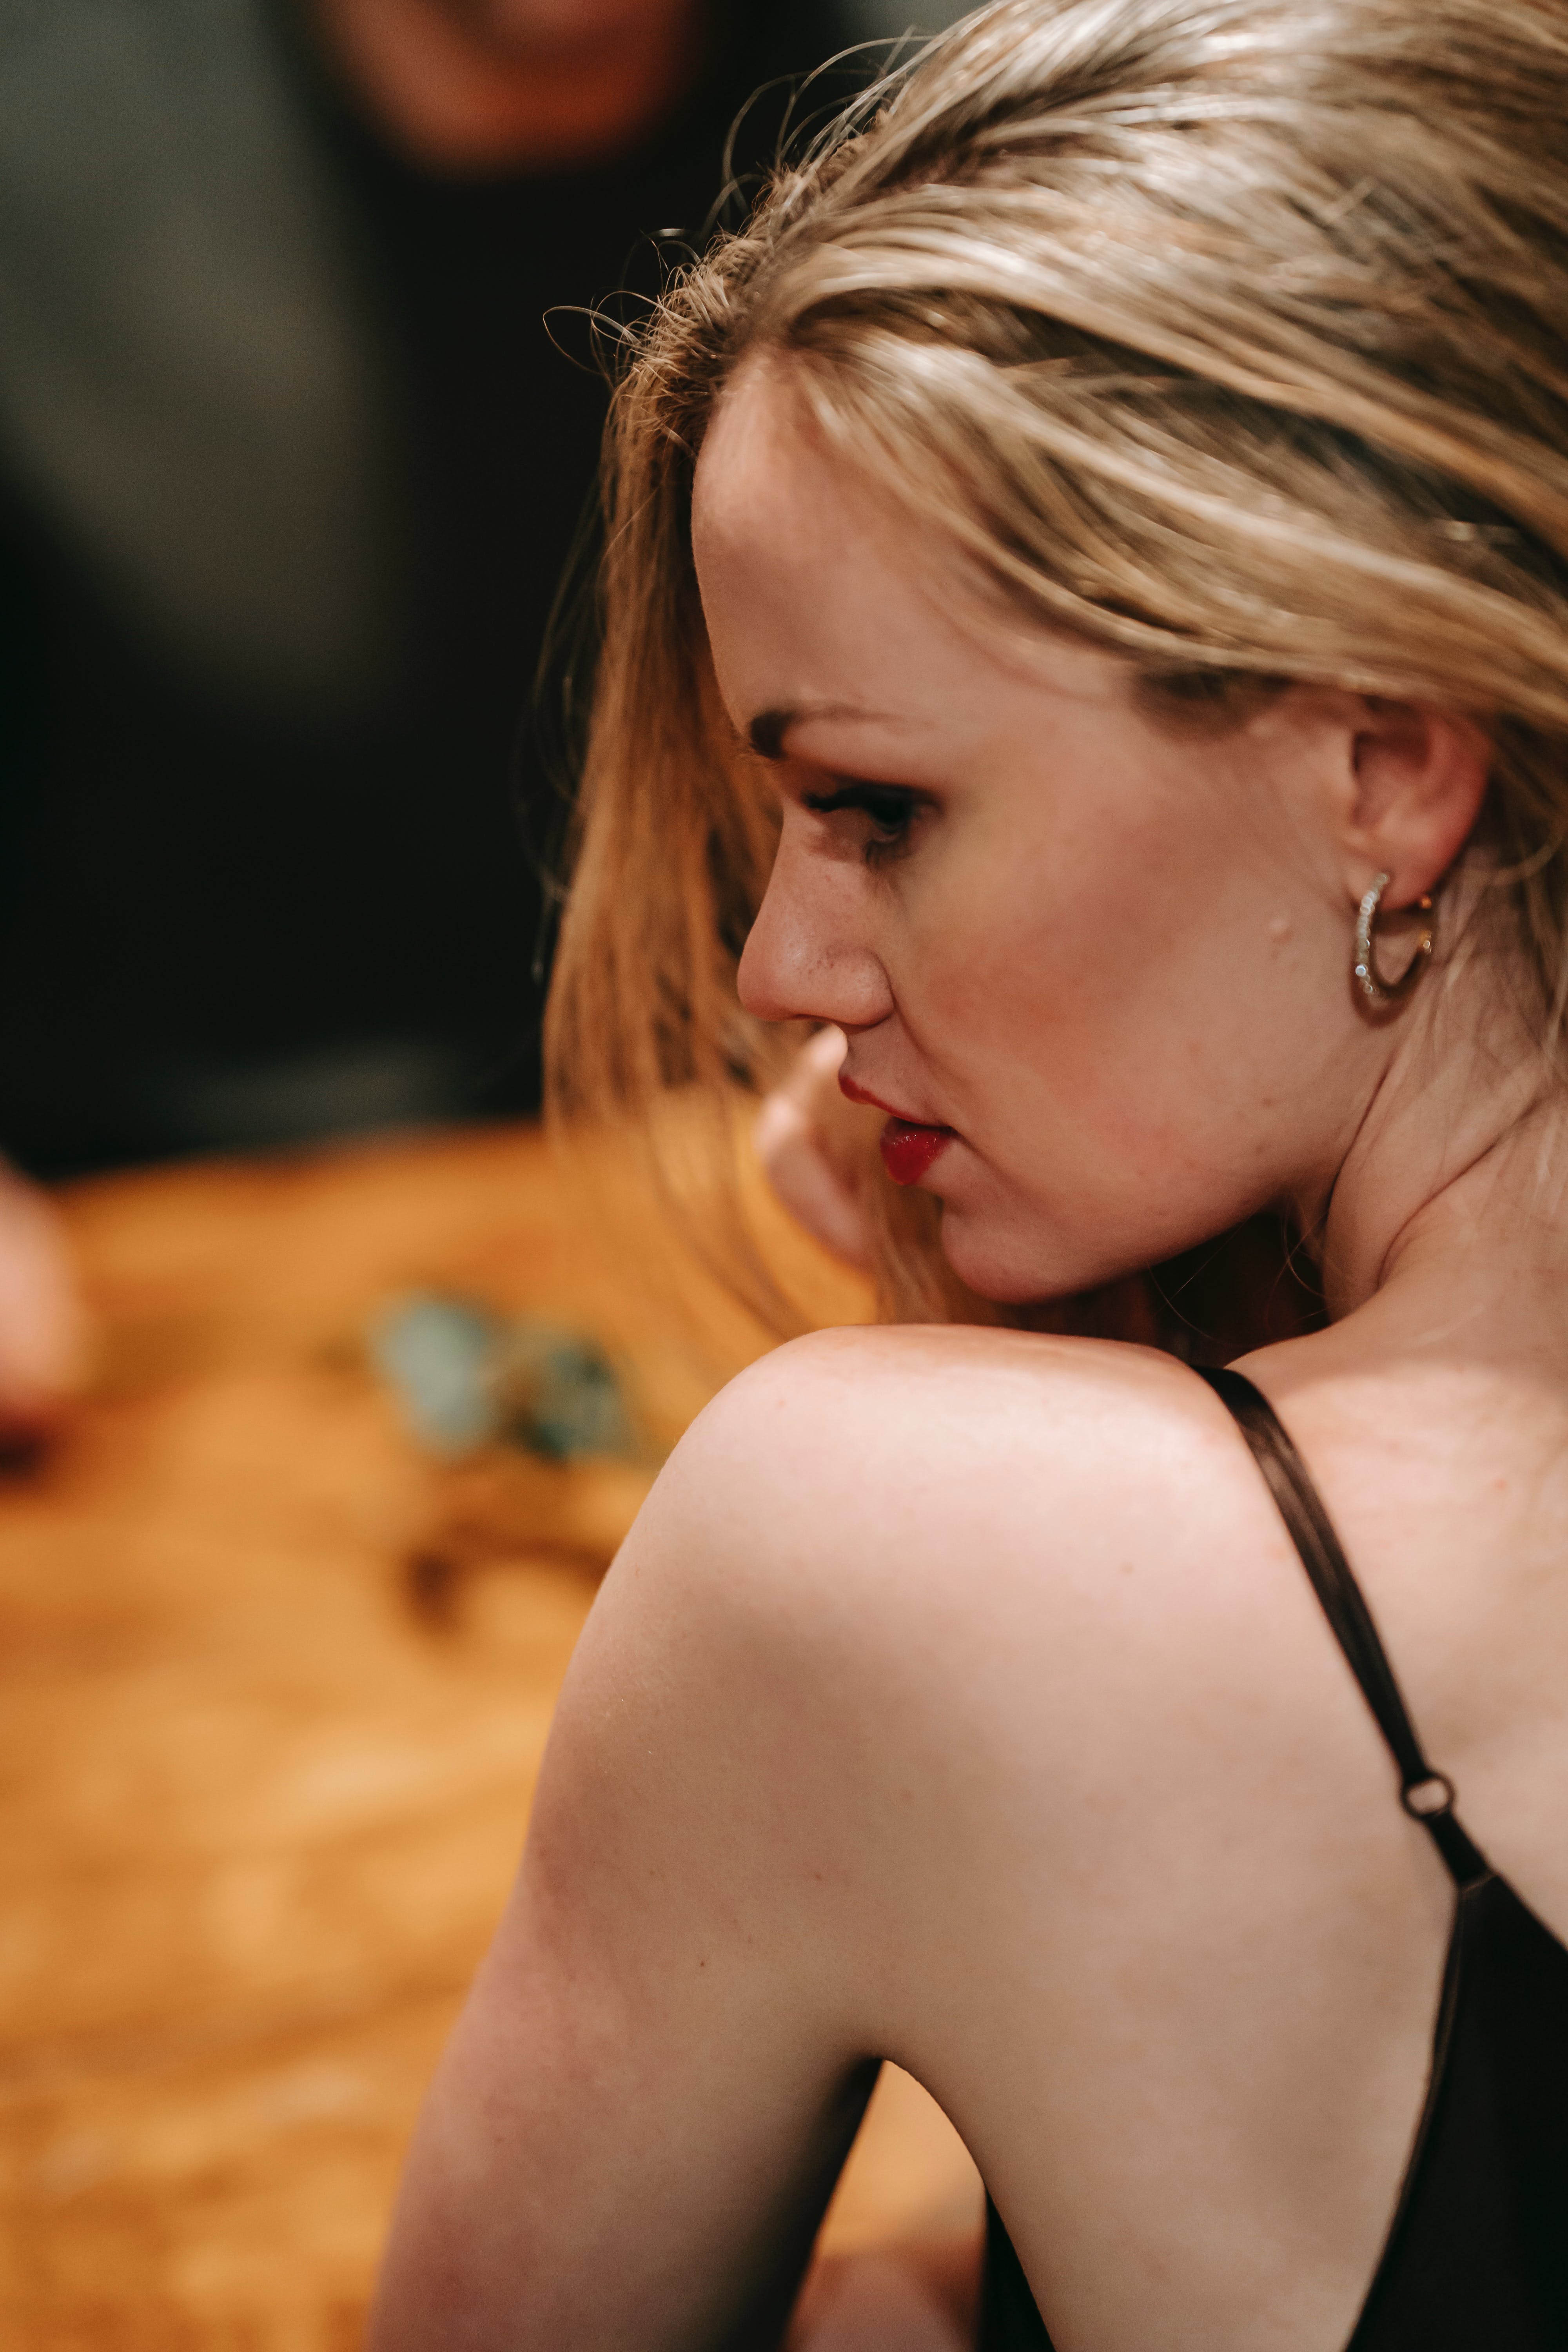 An upset woman looking away with her partner in the background | Source: Pexels